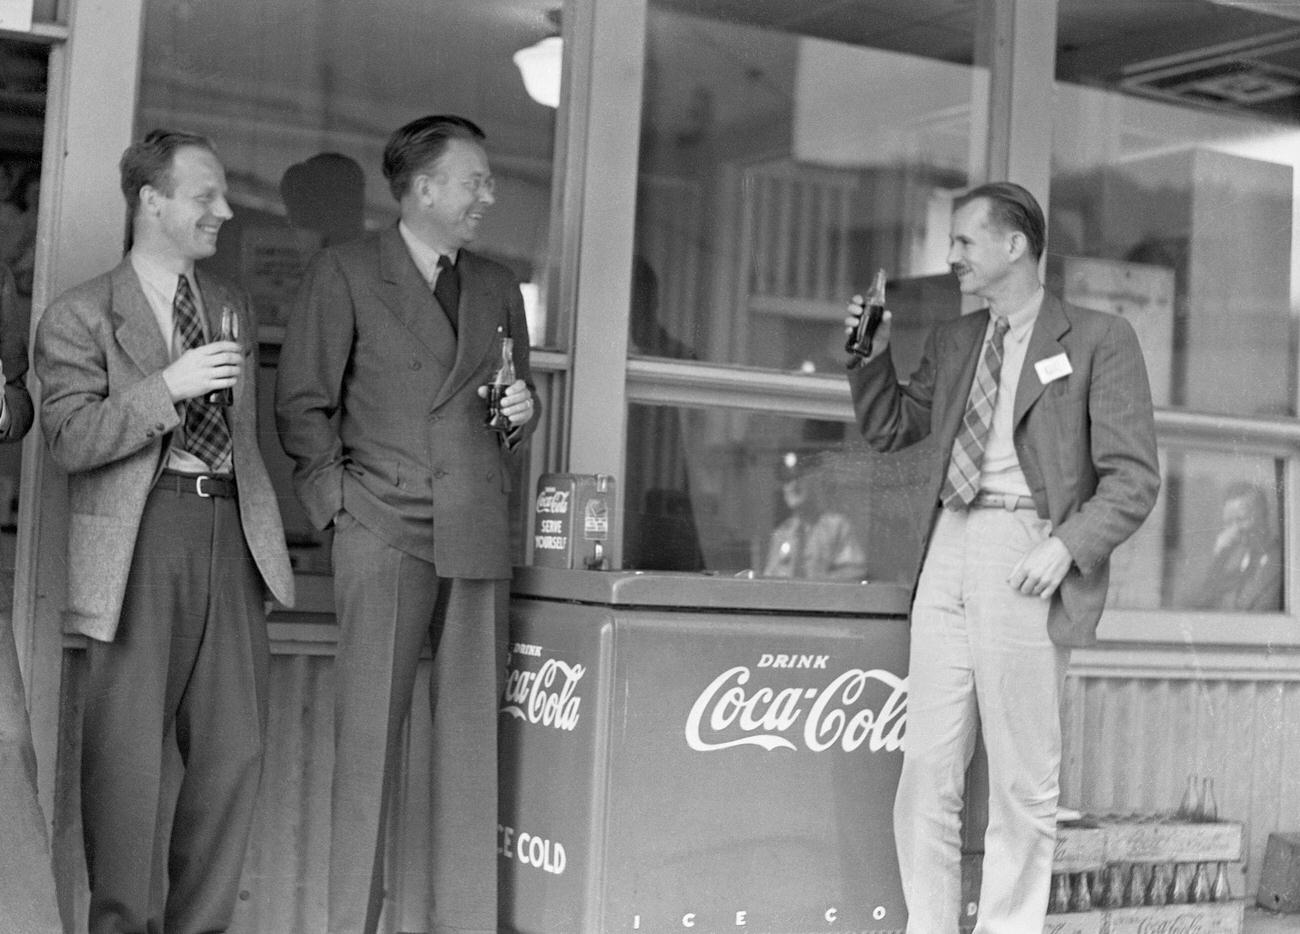 Ernest Lawrence and Arthur Compton enjoying Coca-Colas, date unspecified.